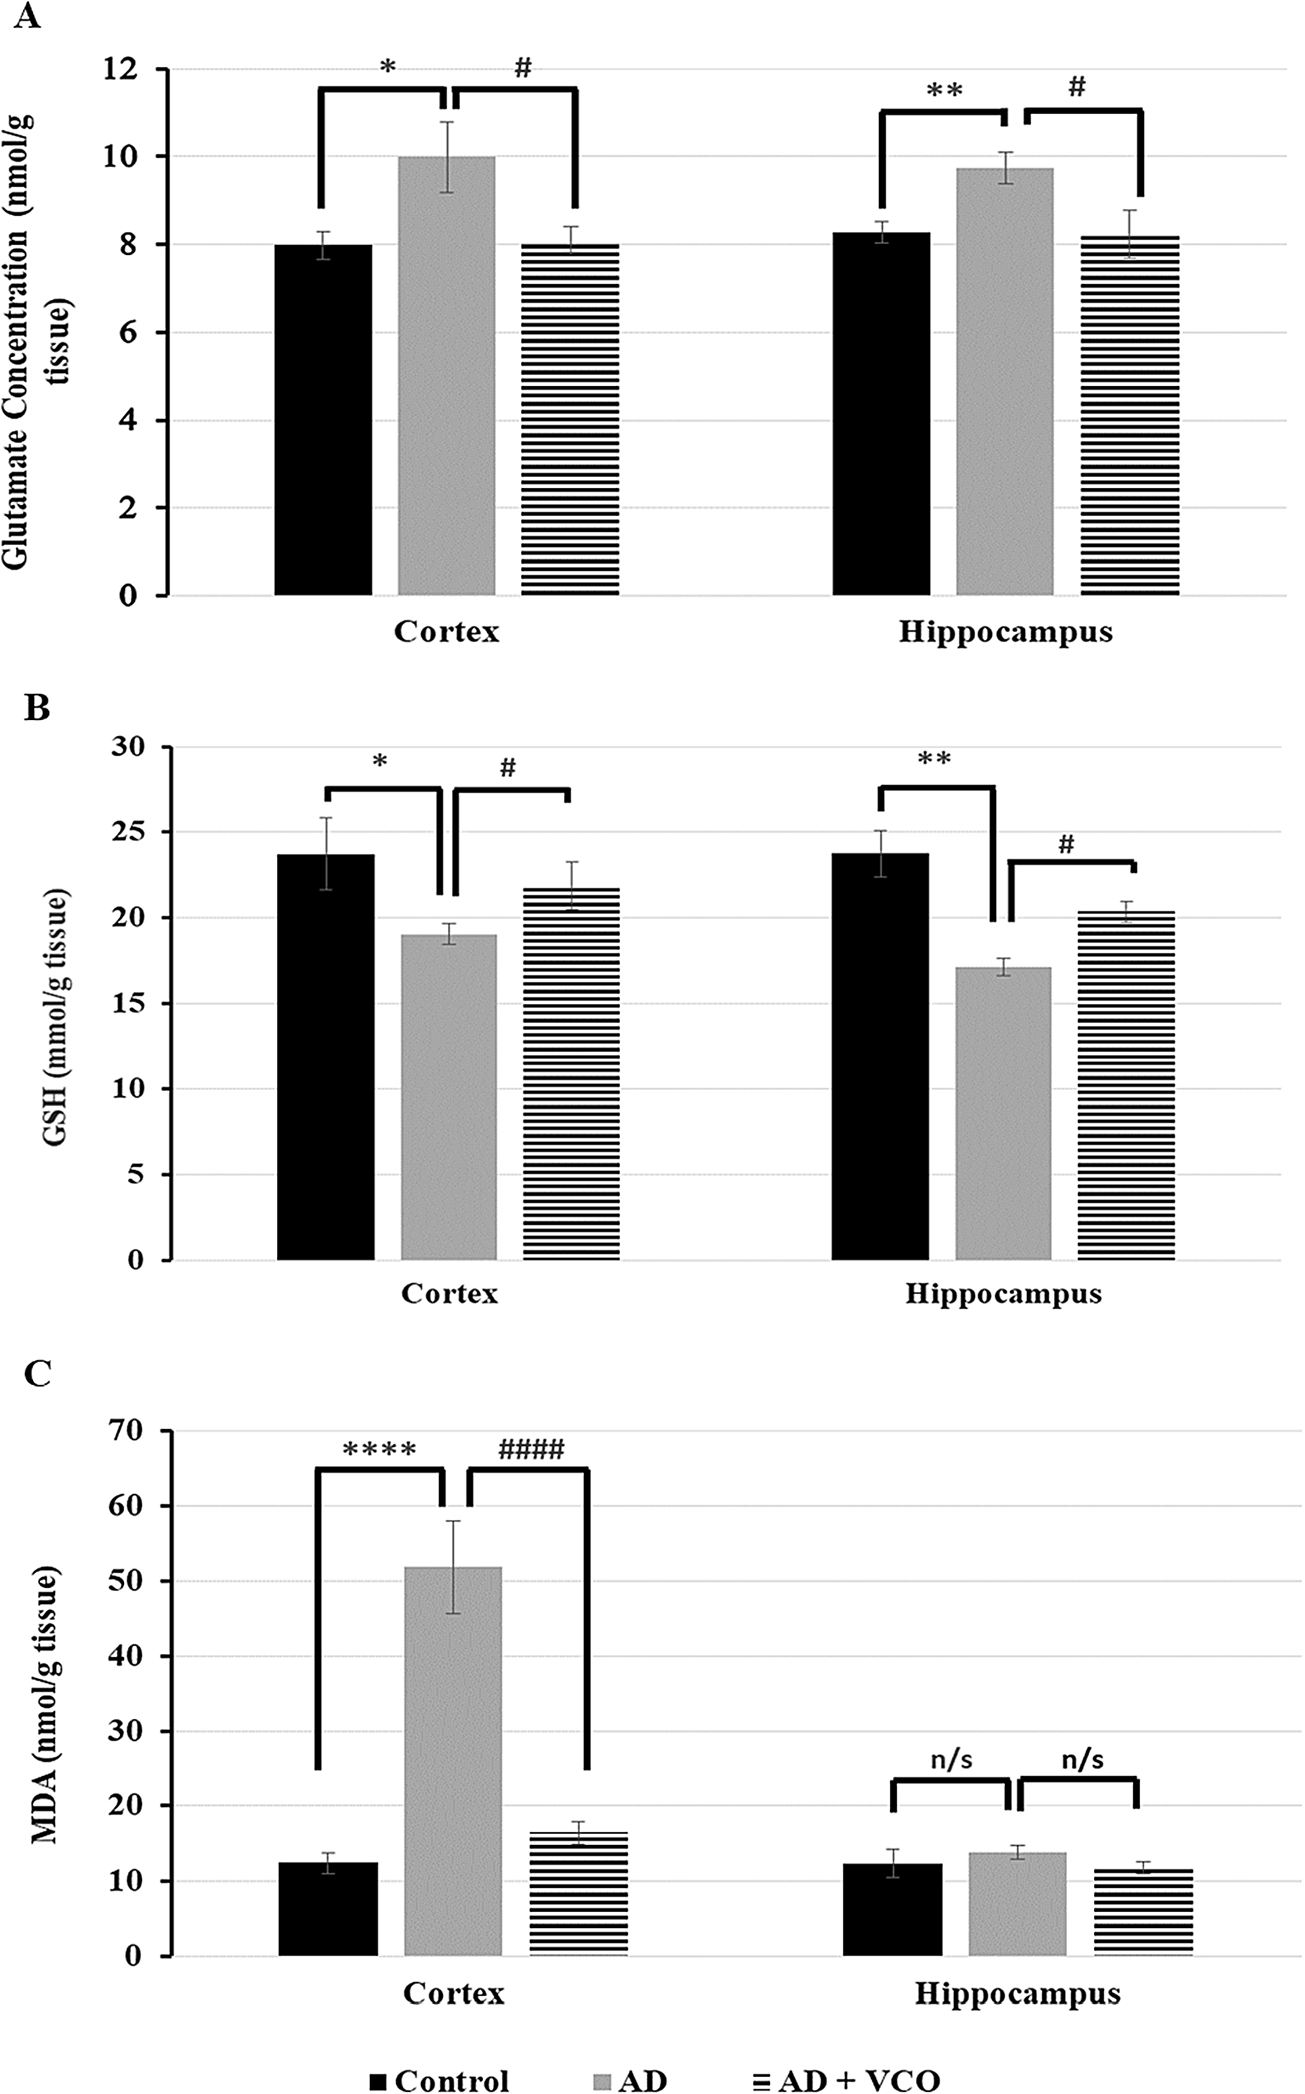 Glutamate, GSH, and MDA levels in the adult rat cortex and hippocampus in different experimental groups assessed by ELIZA. (A) A significant increase in glutamate level is apparent in the AD rats vs. the control rats in the cortex and hippocampus. A significant reduction in glutamate level is shown in the AD+VCO rats vs the AD rats in the cortex and hippocampus. (B) A significant decrease in GSH level is apparent in the AD rats vs. the control rats in the cortex and hippocampus. A significant increase in GSH level is shown in the AD+VCO rats vs the AD rats in the cortex and hippocampus. (C) A significant increase in the MDA level is apparent in the AD rats vs. the control rats in the cortex. A significant reduction in MDA level is shown in the AD+VCO rats vs. the AD rats in the cortex. The MDA level shows nonsignificant changes in the hippocampus.